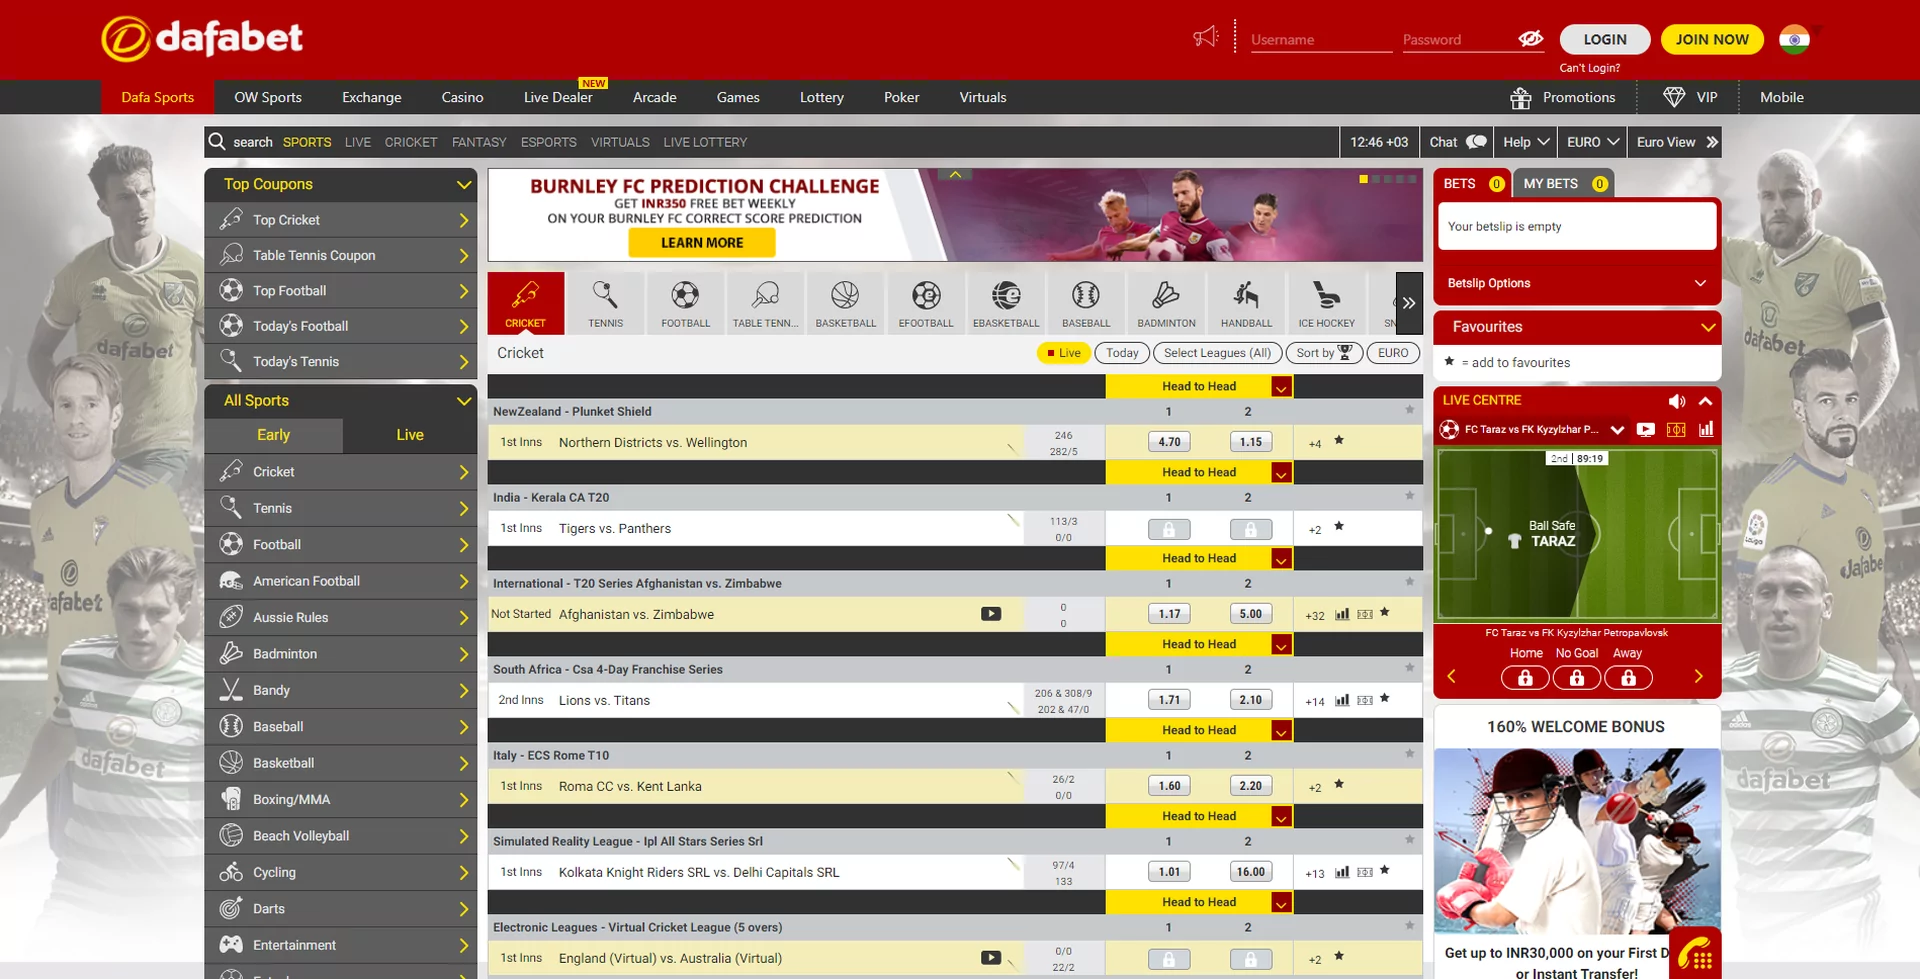 dafabet sports betting page